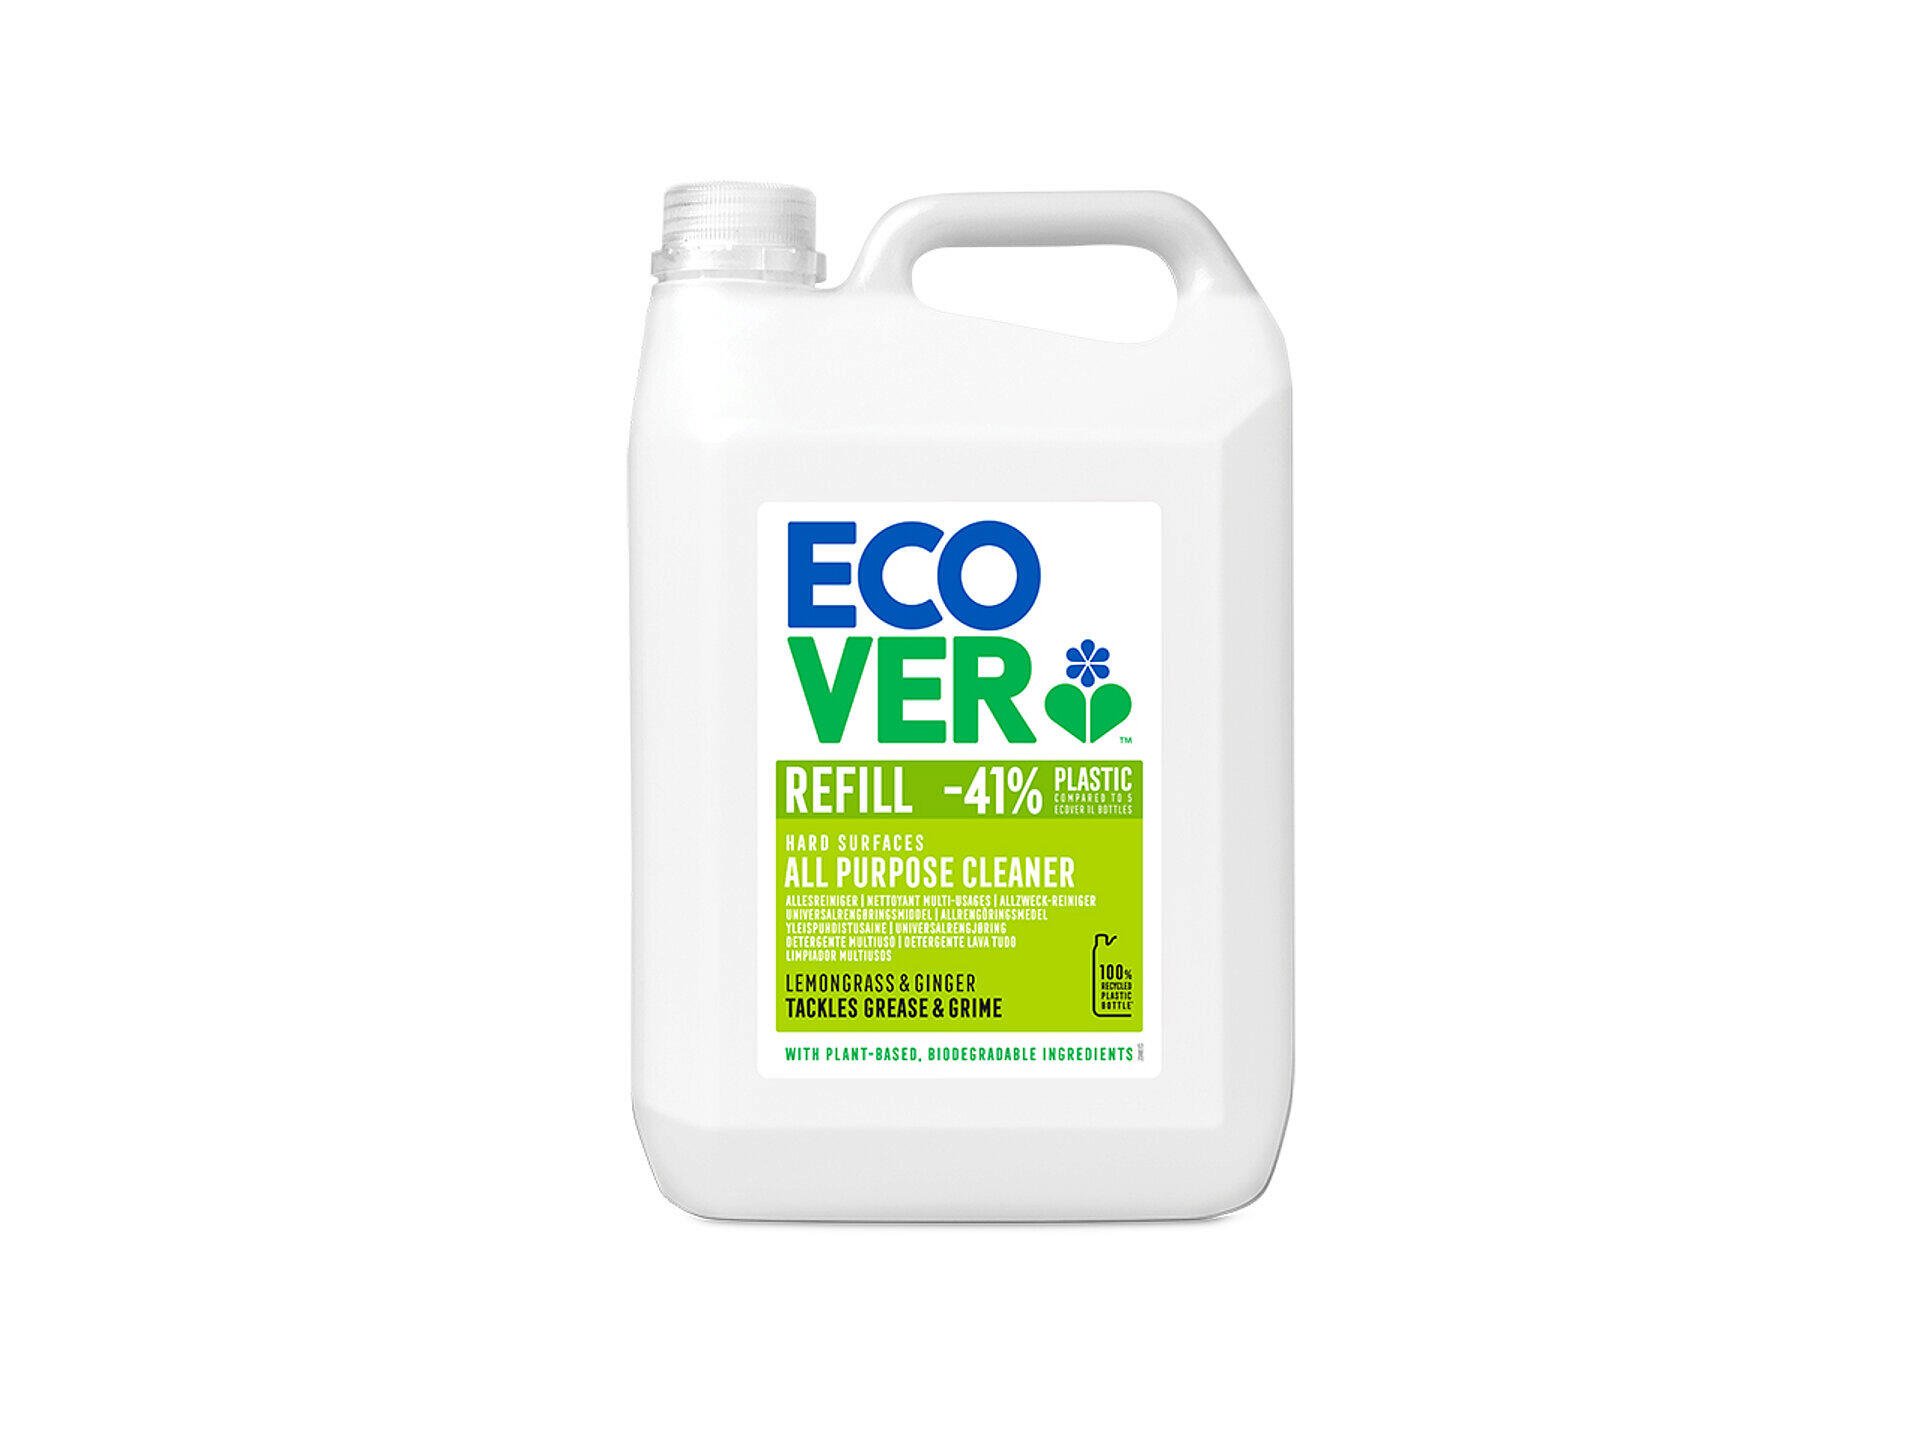 Ecover nettoyant multi-usages 5l tackles grease & grime